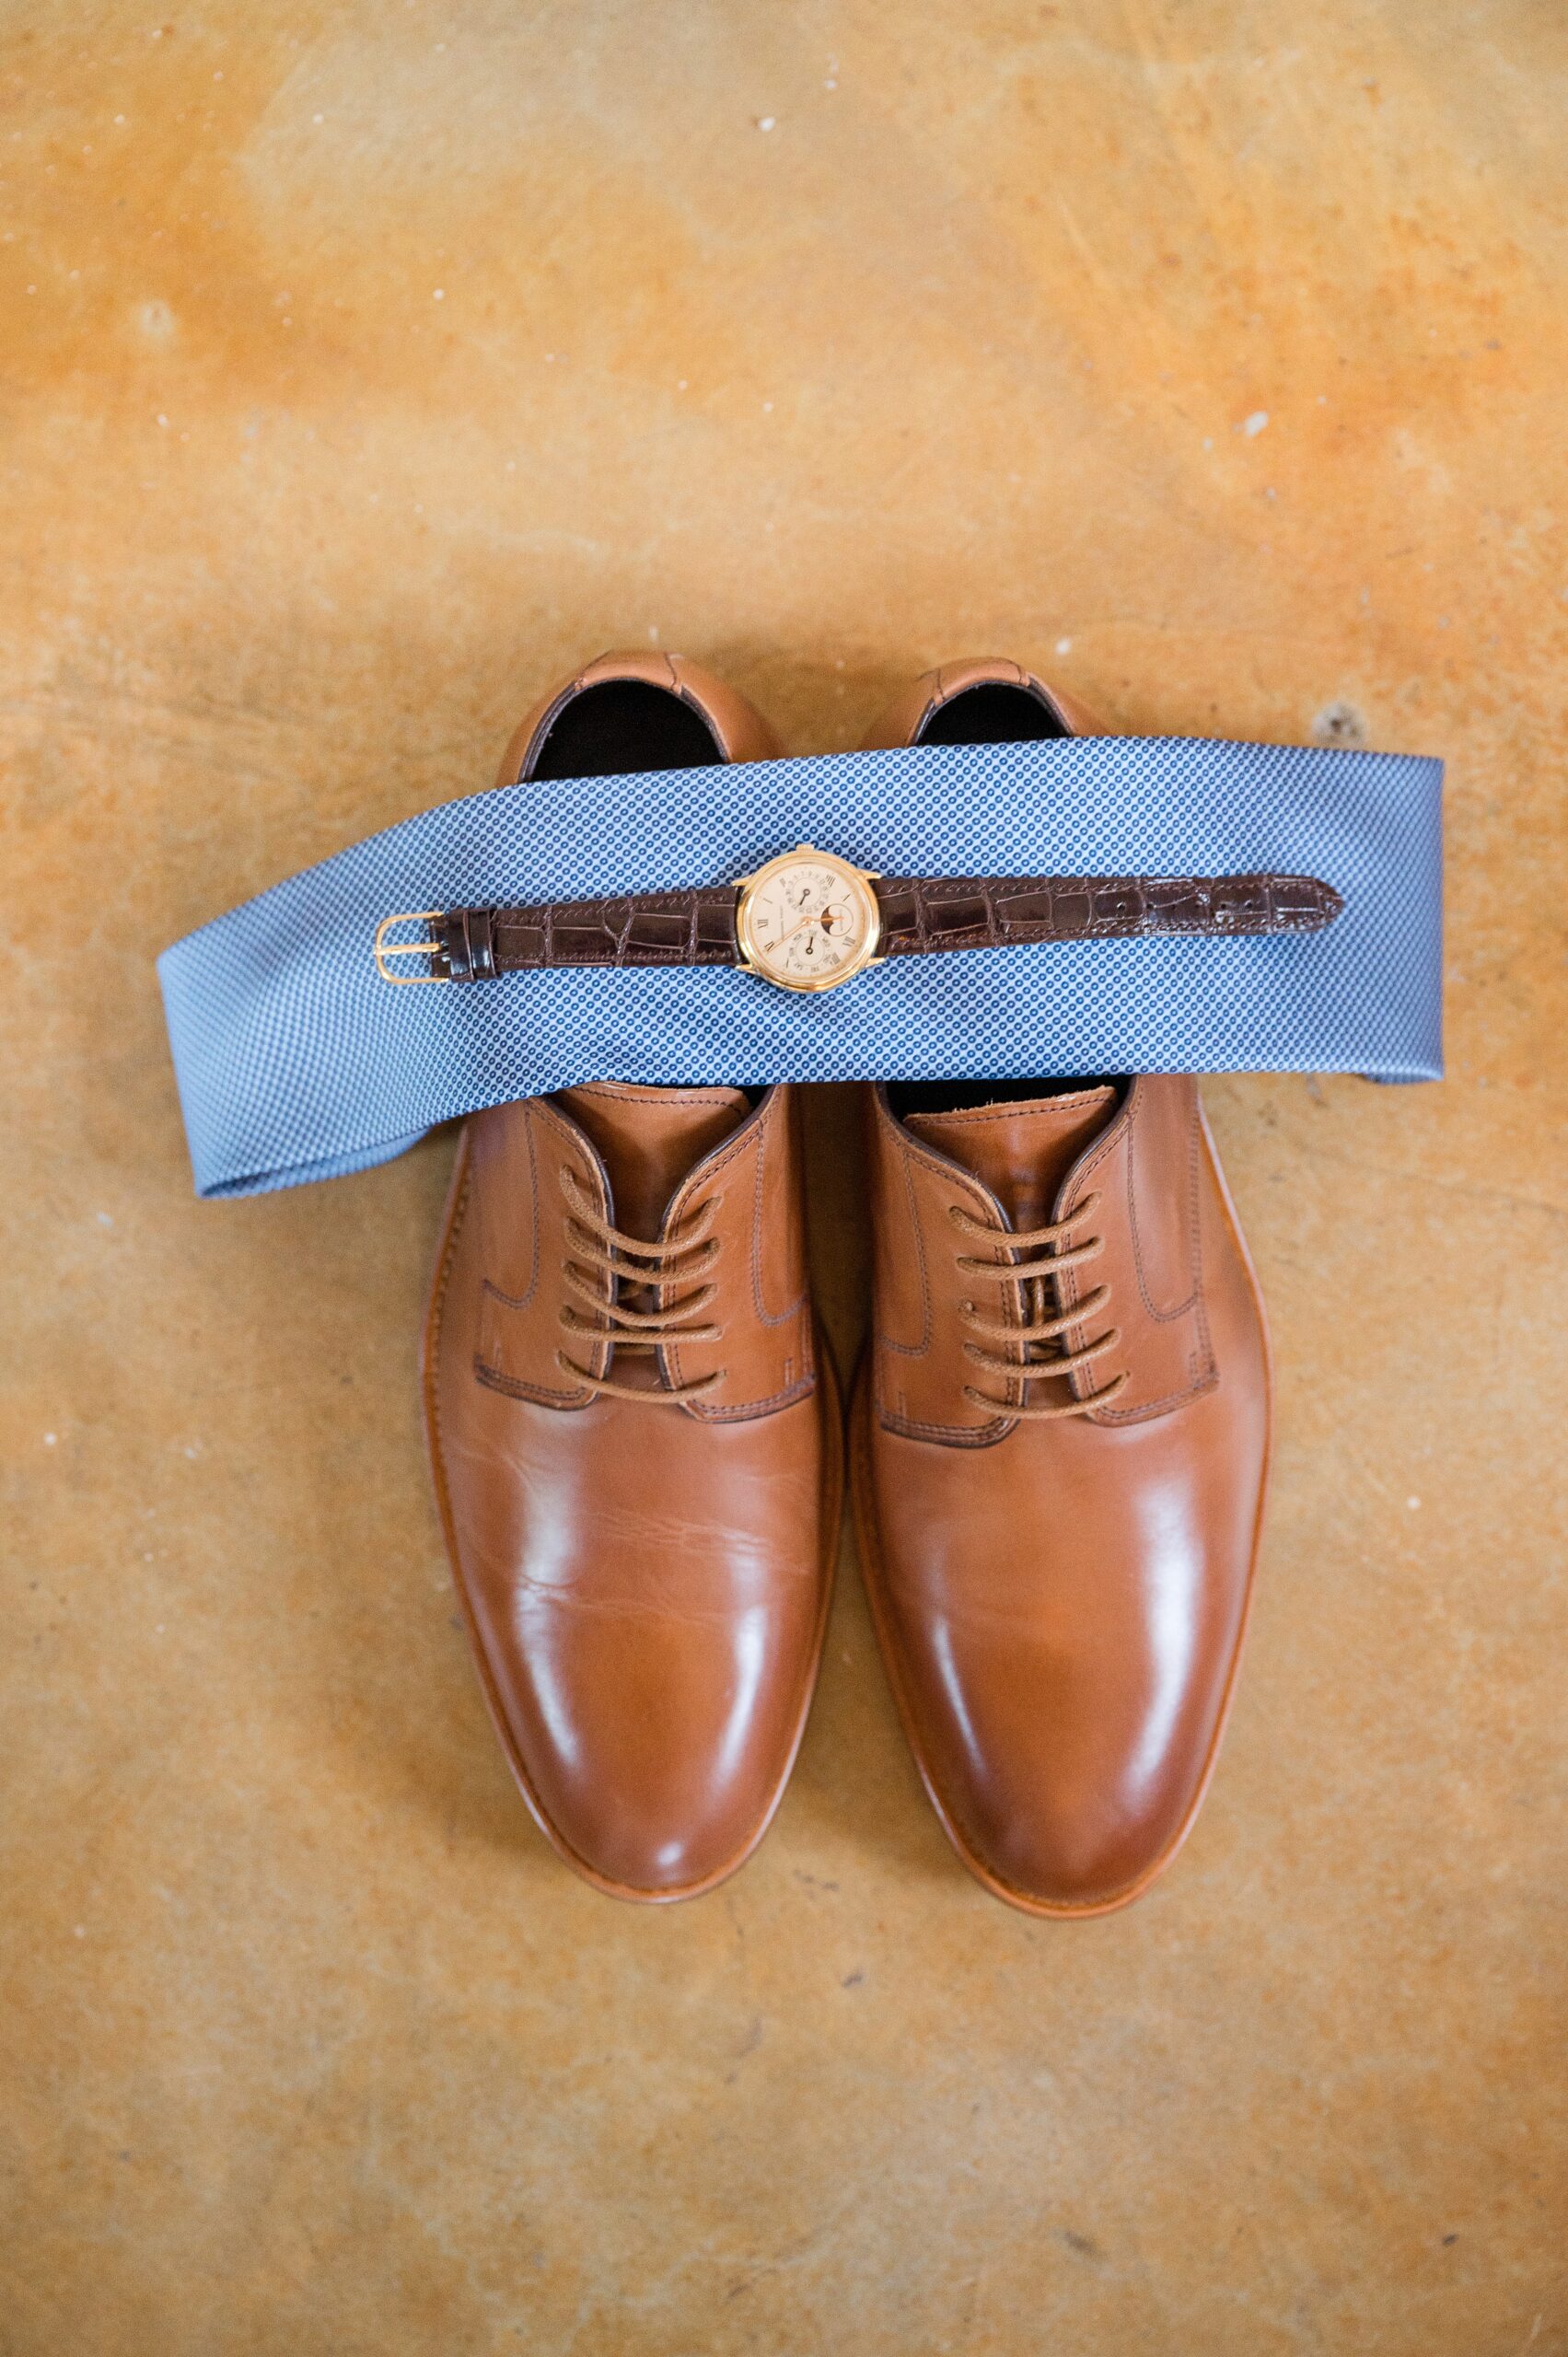 Groom details of shoes, tie and watch on a brown floor